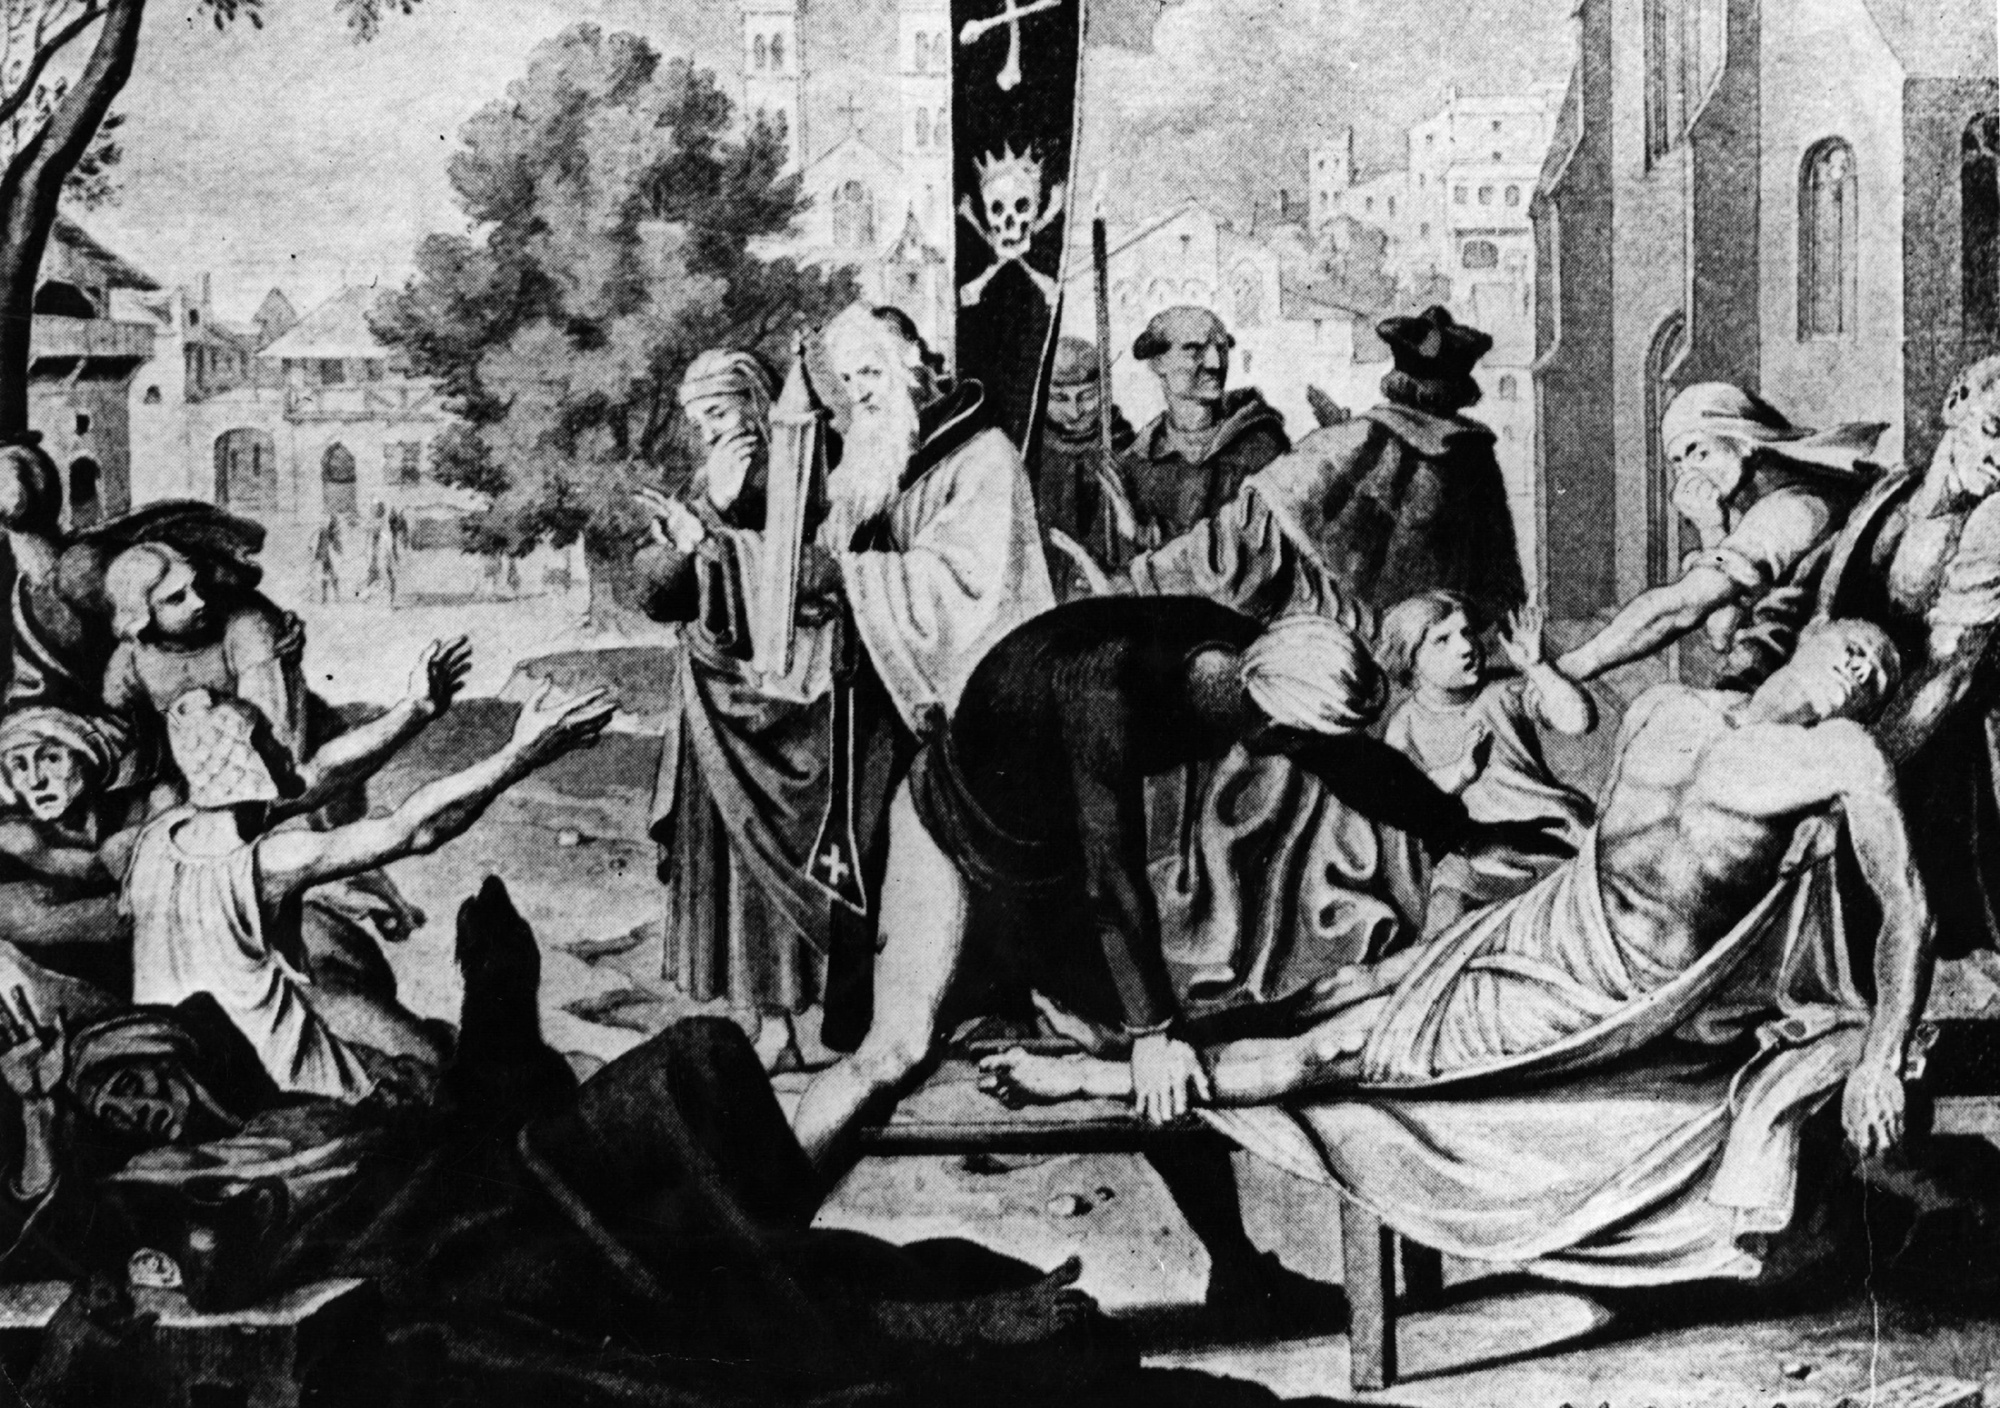 economic effects of the black death